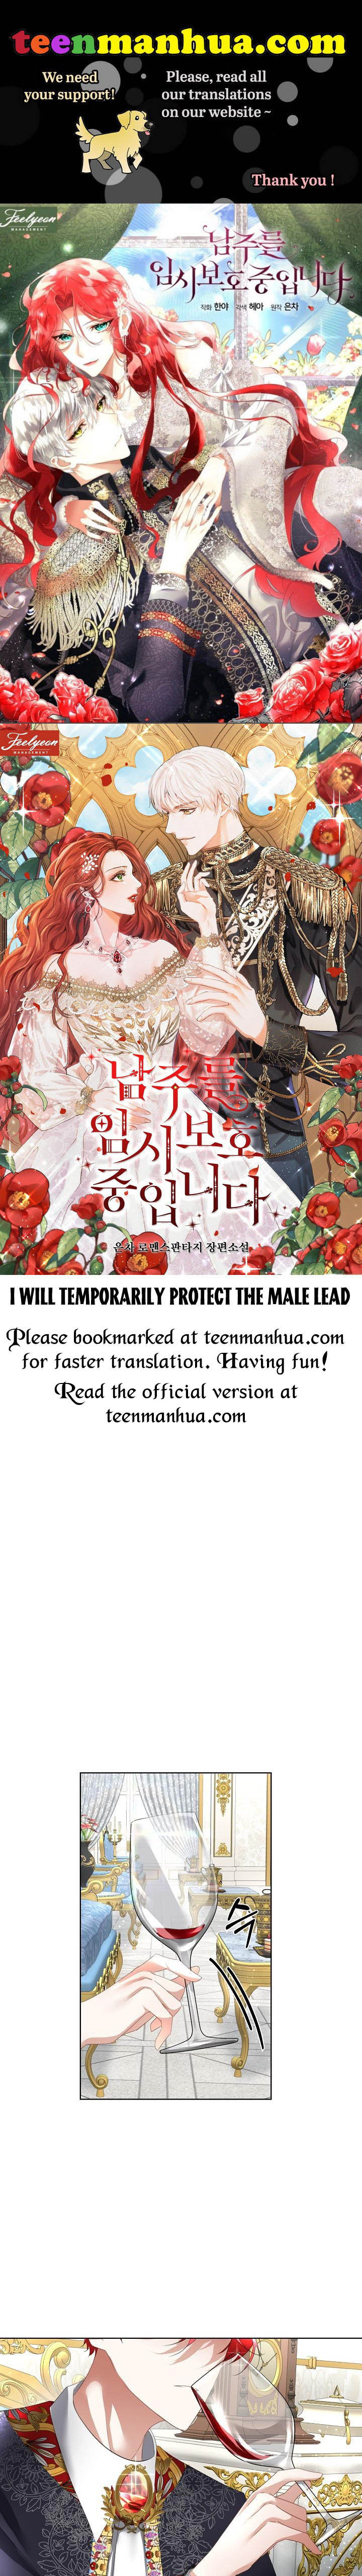 I Will Temporarily Protect The Male Lead - Page 1